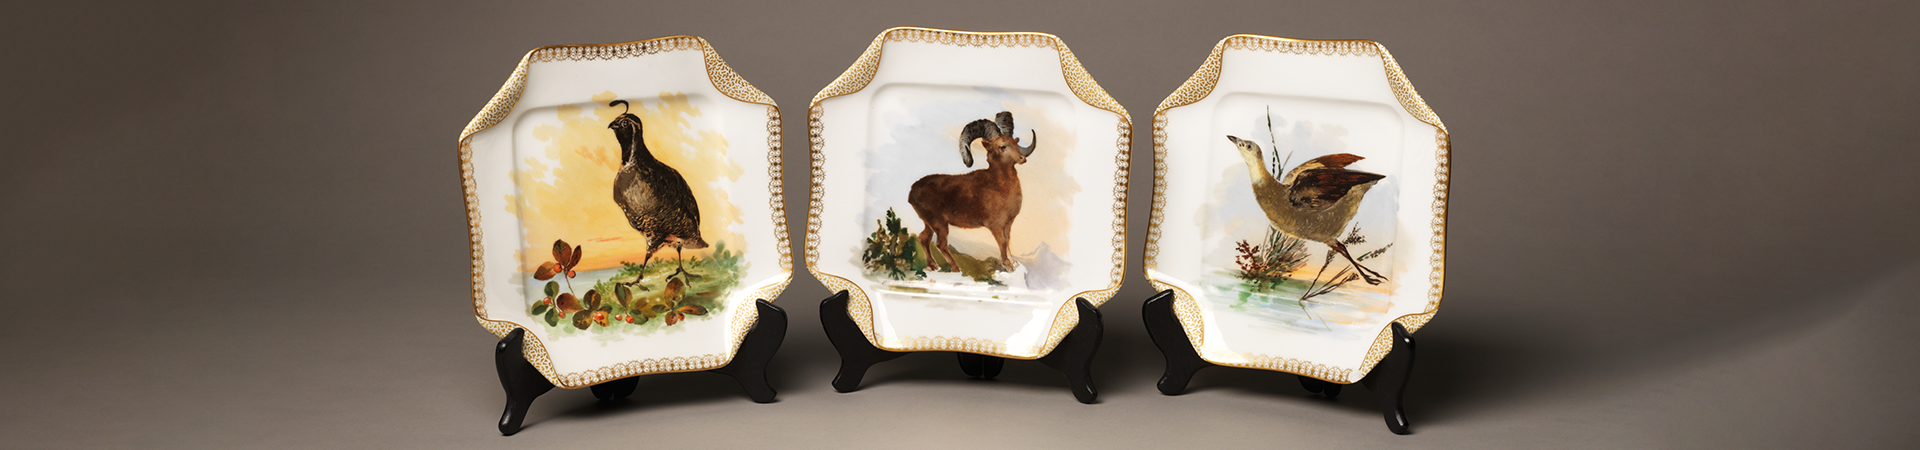  three plates with game paintings in the center and gold trim  